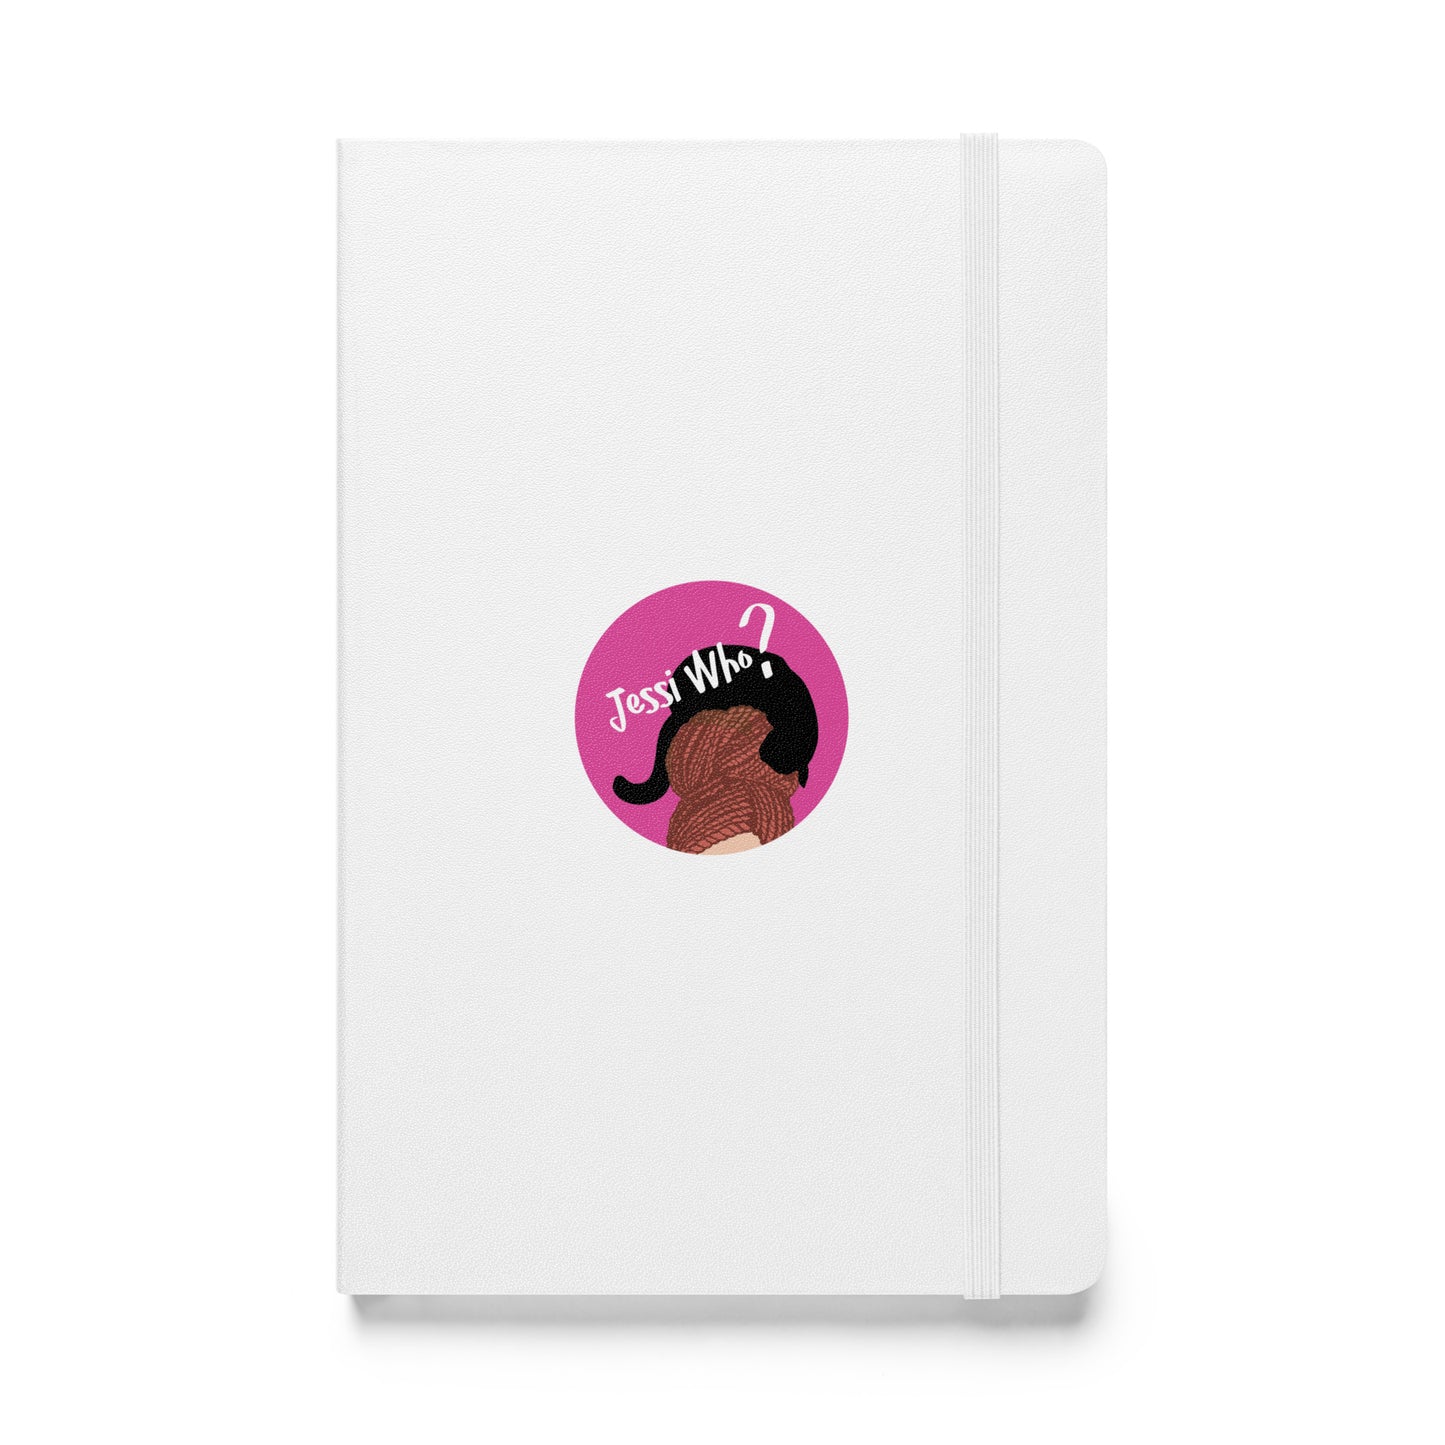 Jessi Who? Hardcover notebook